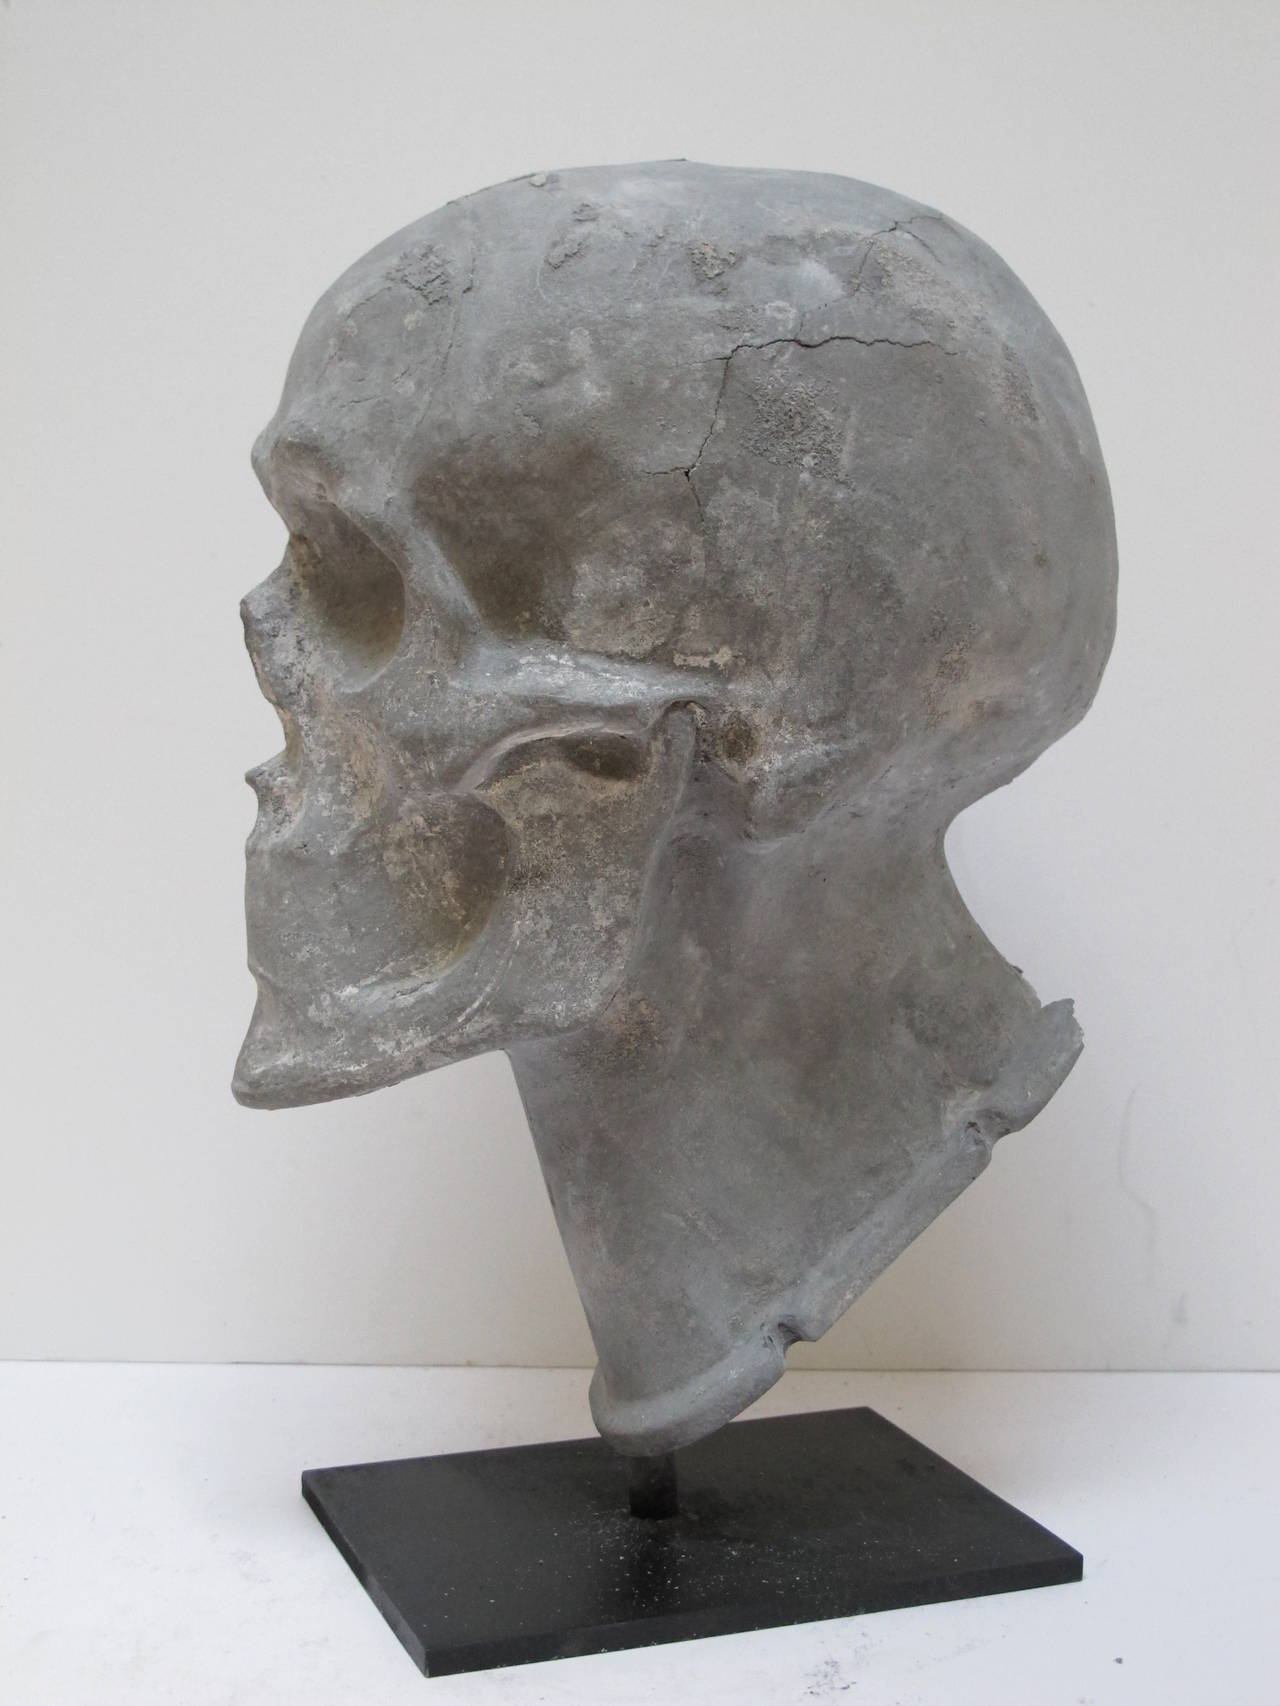 Hollow cast zinc or aluminum skull made as a teaching aid. The finely detailed skull would be used as a forensics teaching model. Mounted on an American primitive metal base.